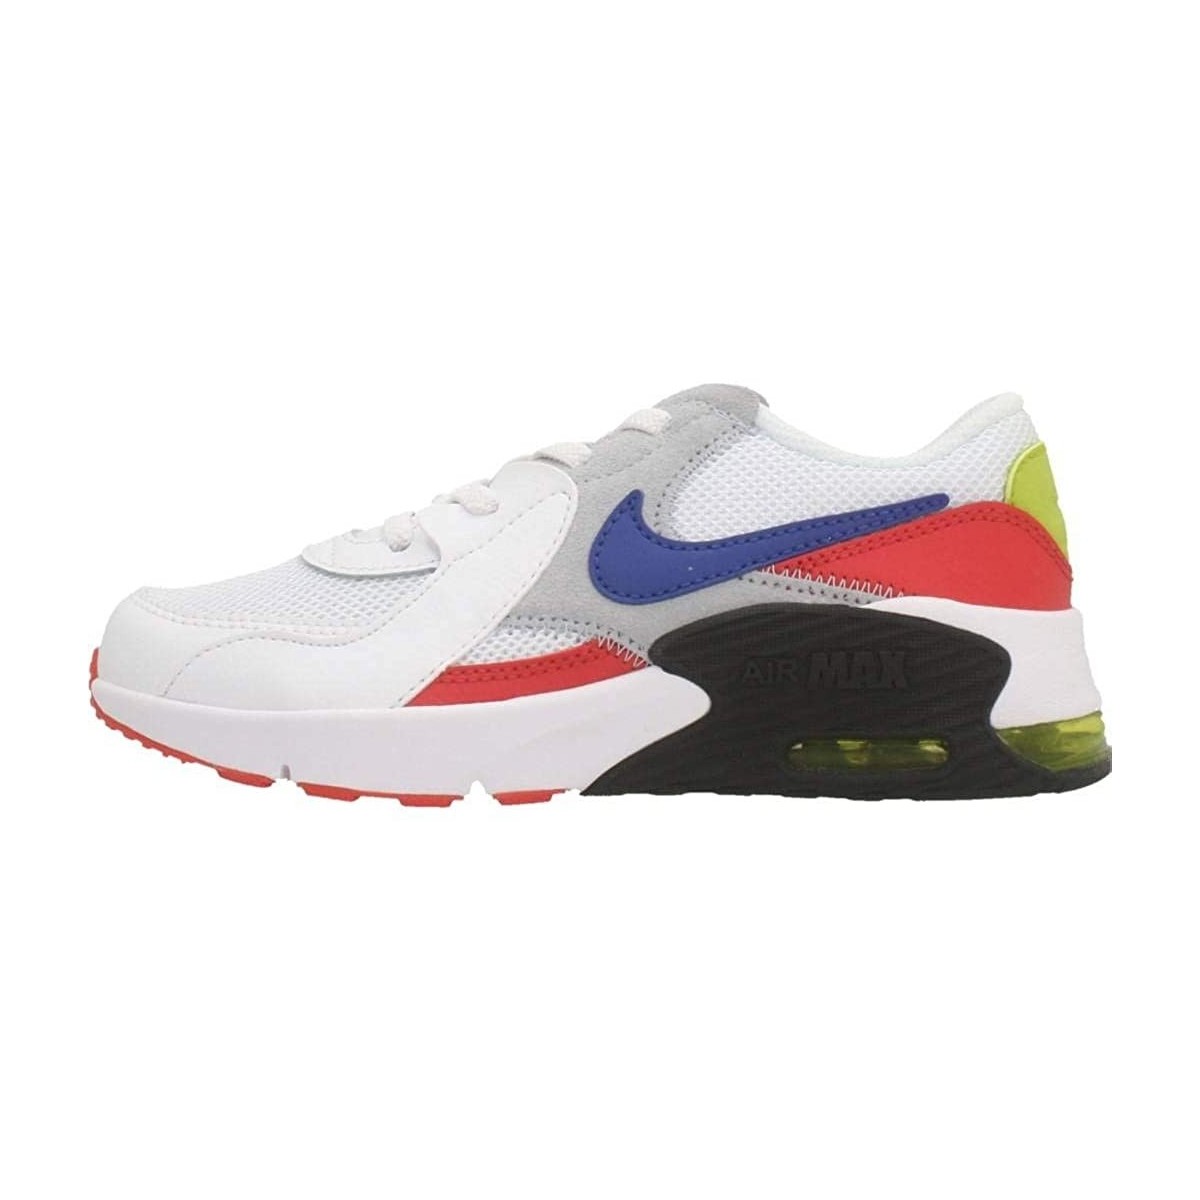 Max PS Air Shoes Excee Nike 101 CD6892